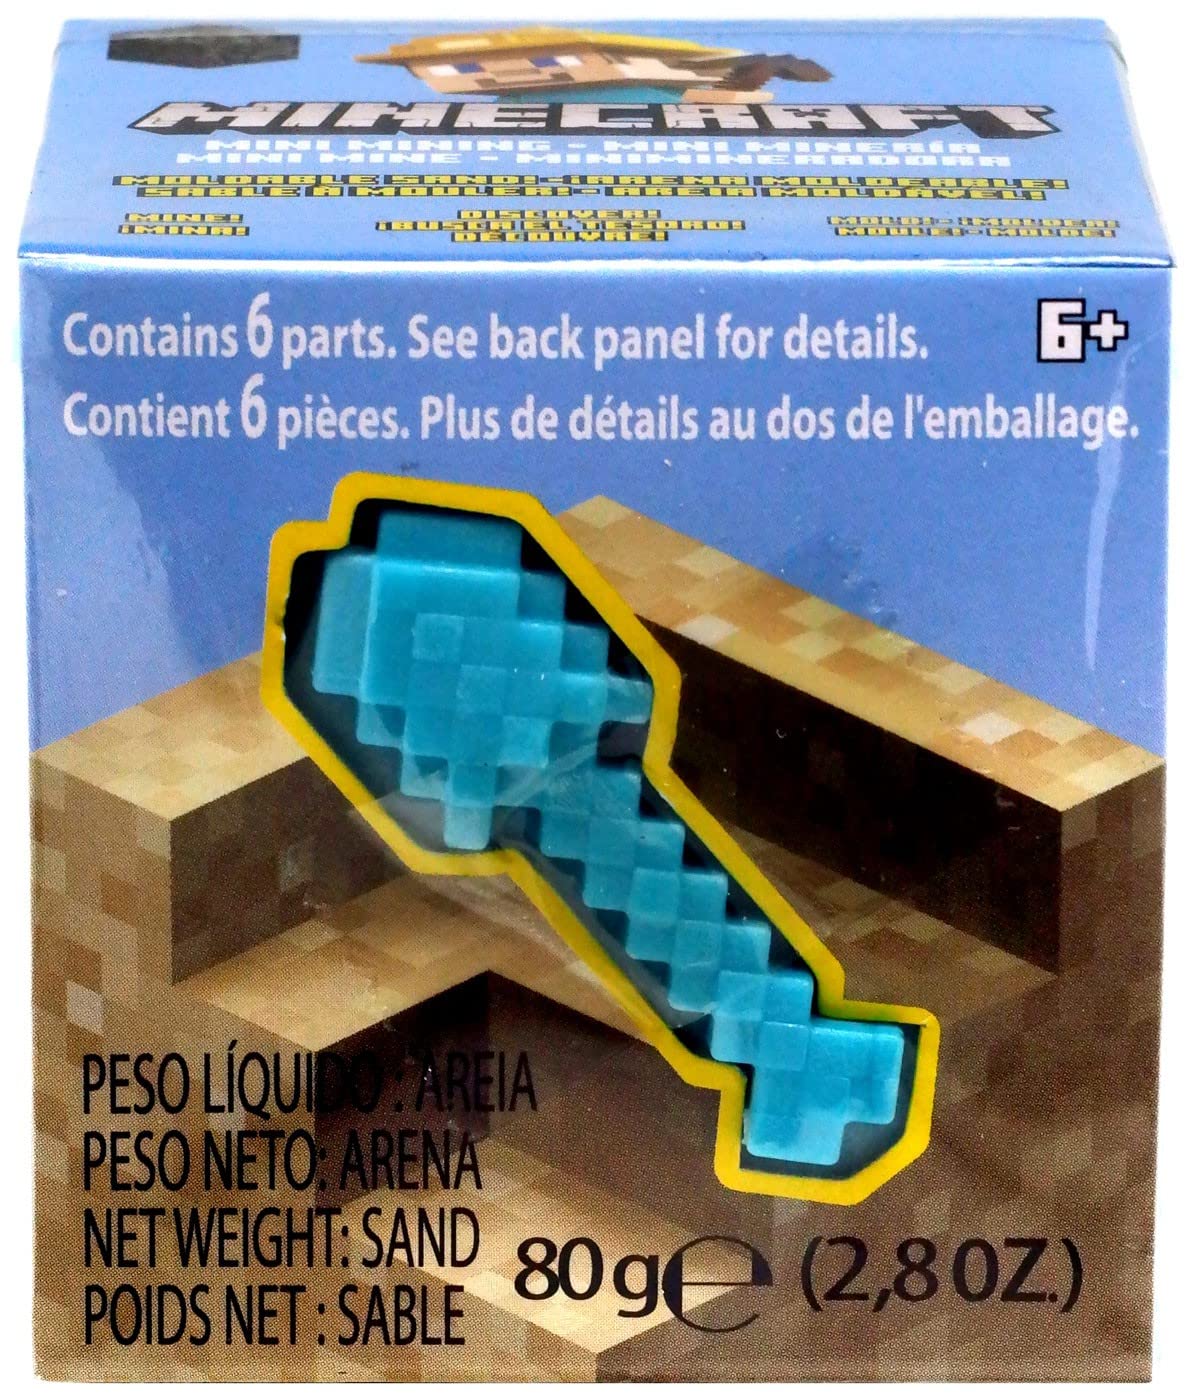 Minecraft Mini Elementals Cave Exploration Set and Environment Accessory with Moldable Sand for Added Creativity, Creative, Hands-on Biome Build Toy, Gift for Minecraft fans Age 6 Years and Older